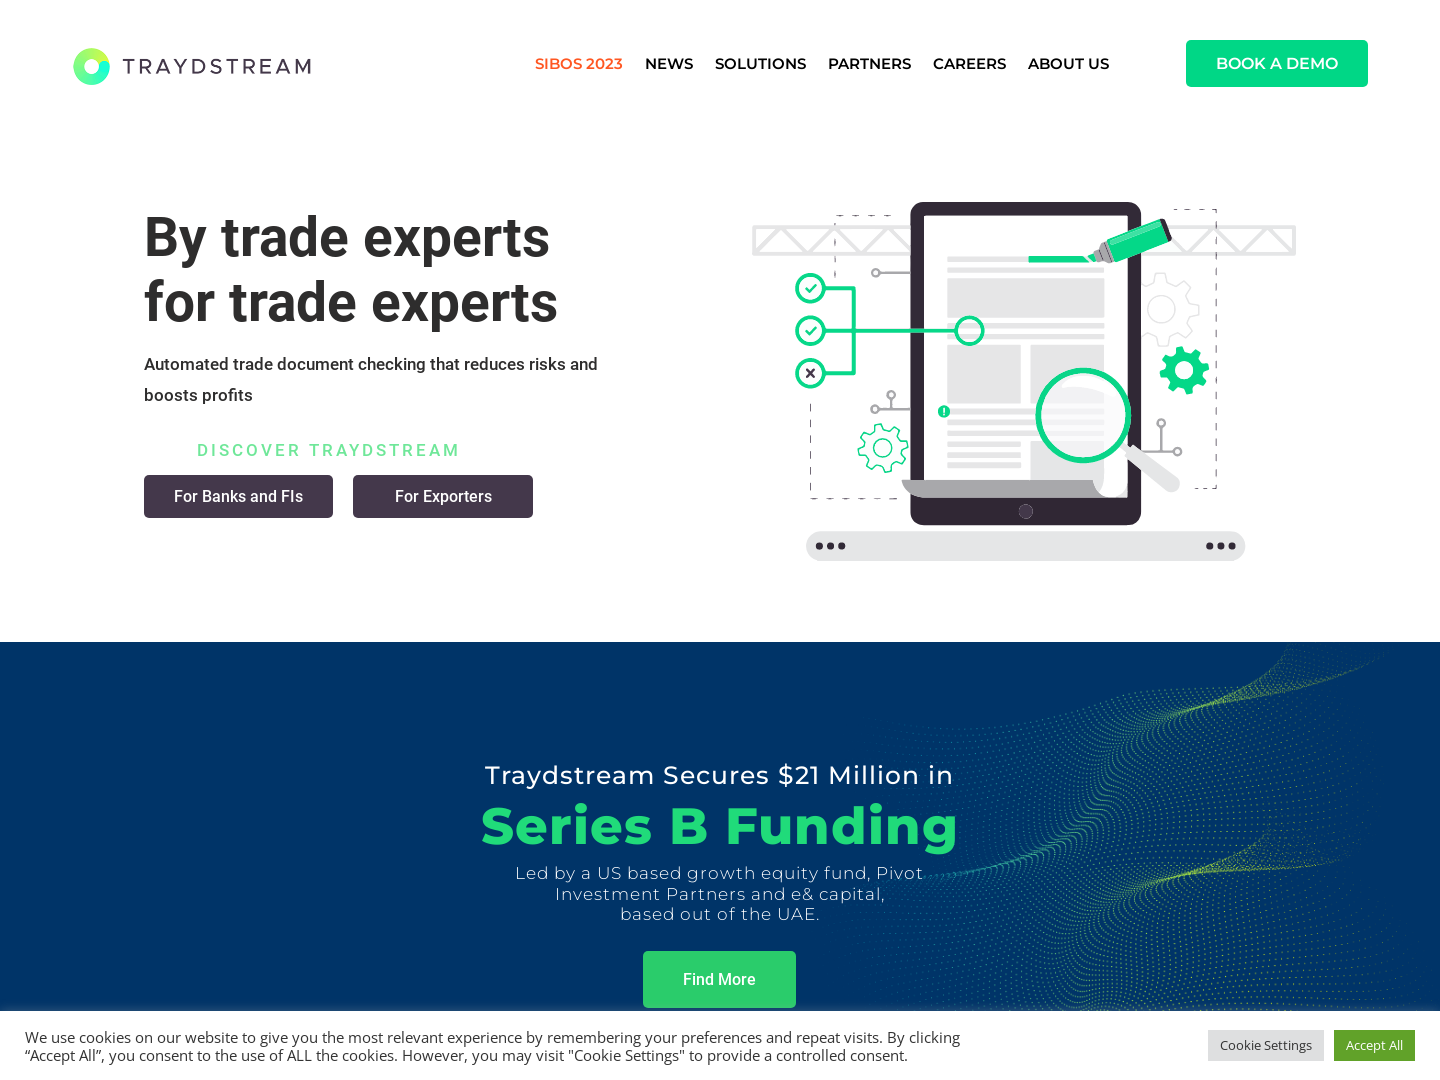 Traydstream Secures $21 Million Series B Funding for Trade Finance Transformation